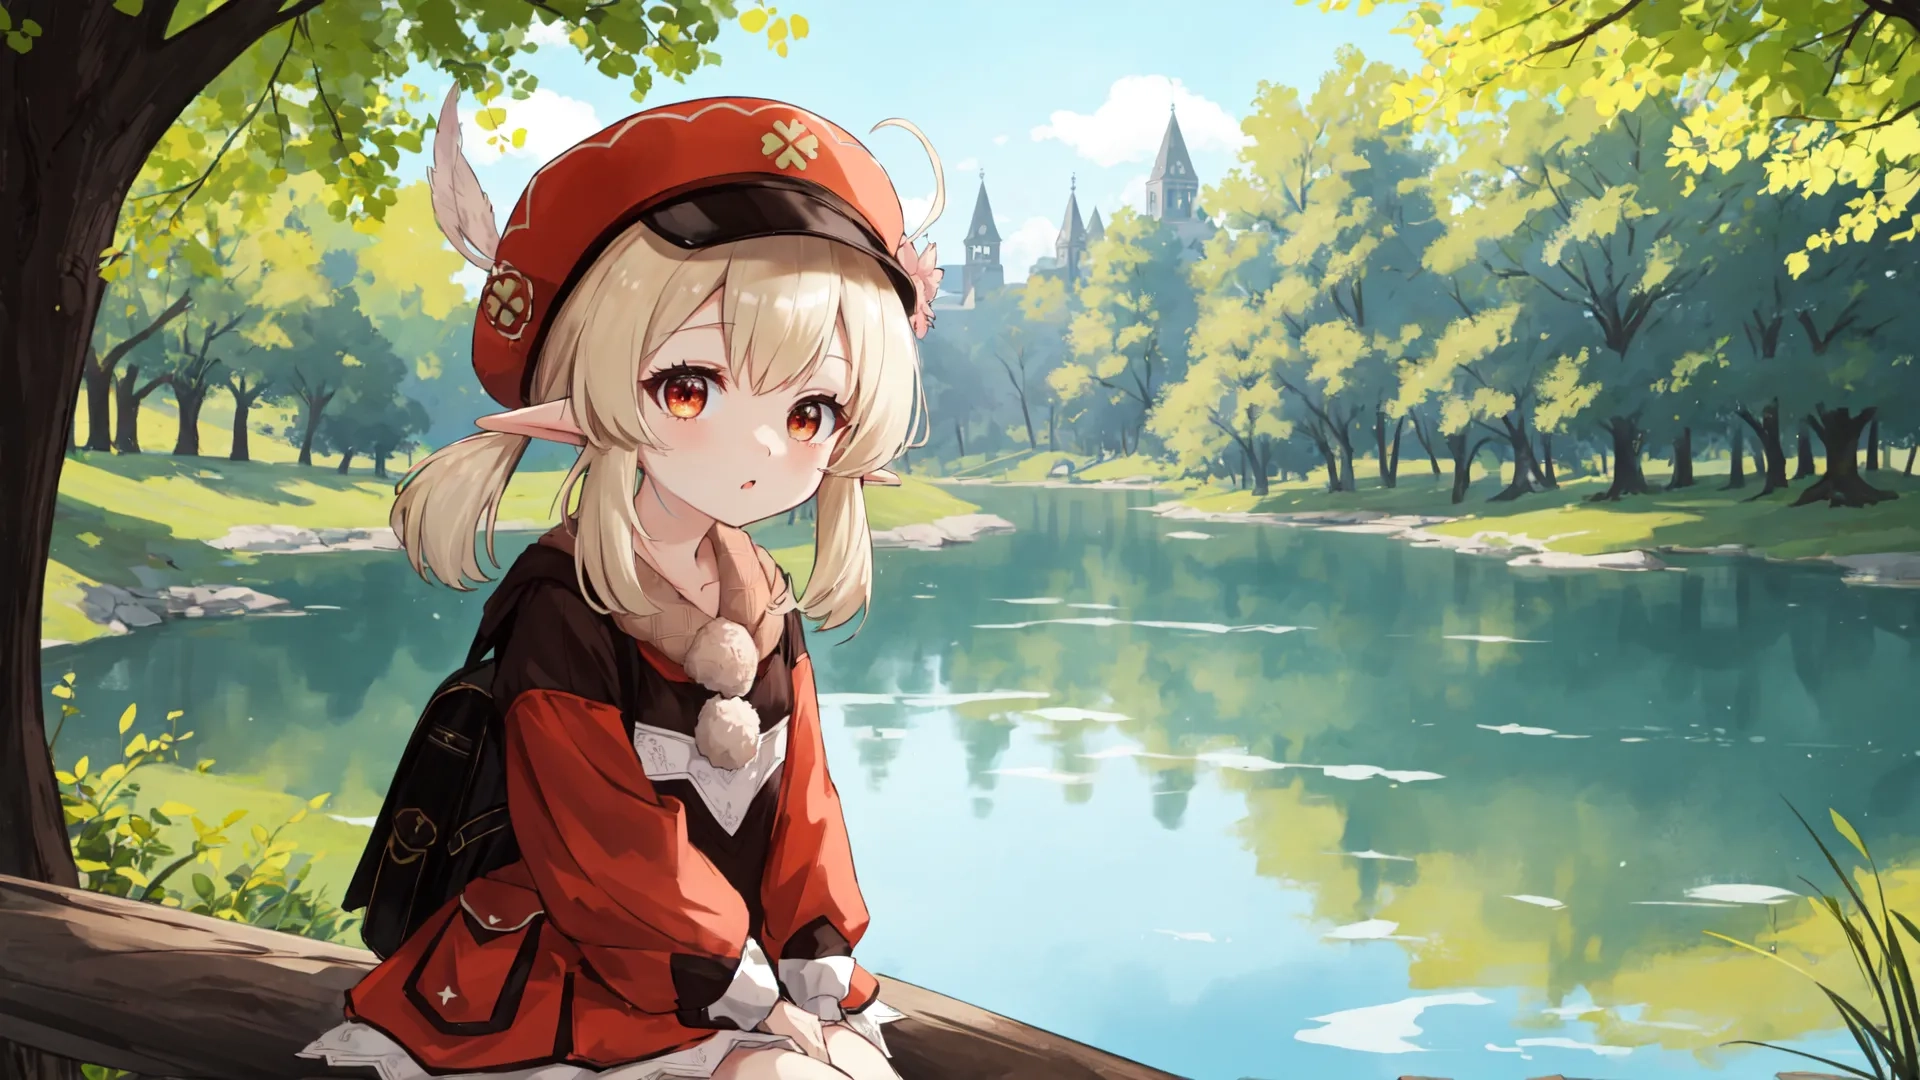 an anime character sits on a long log looking out over a pond with trees in the background and a castle in the distance across from her
